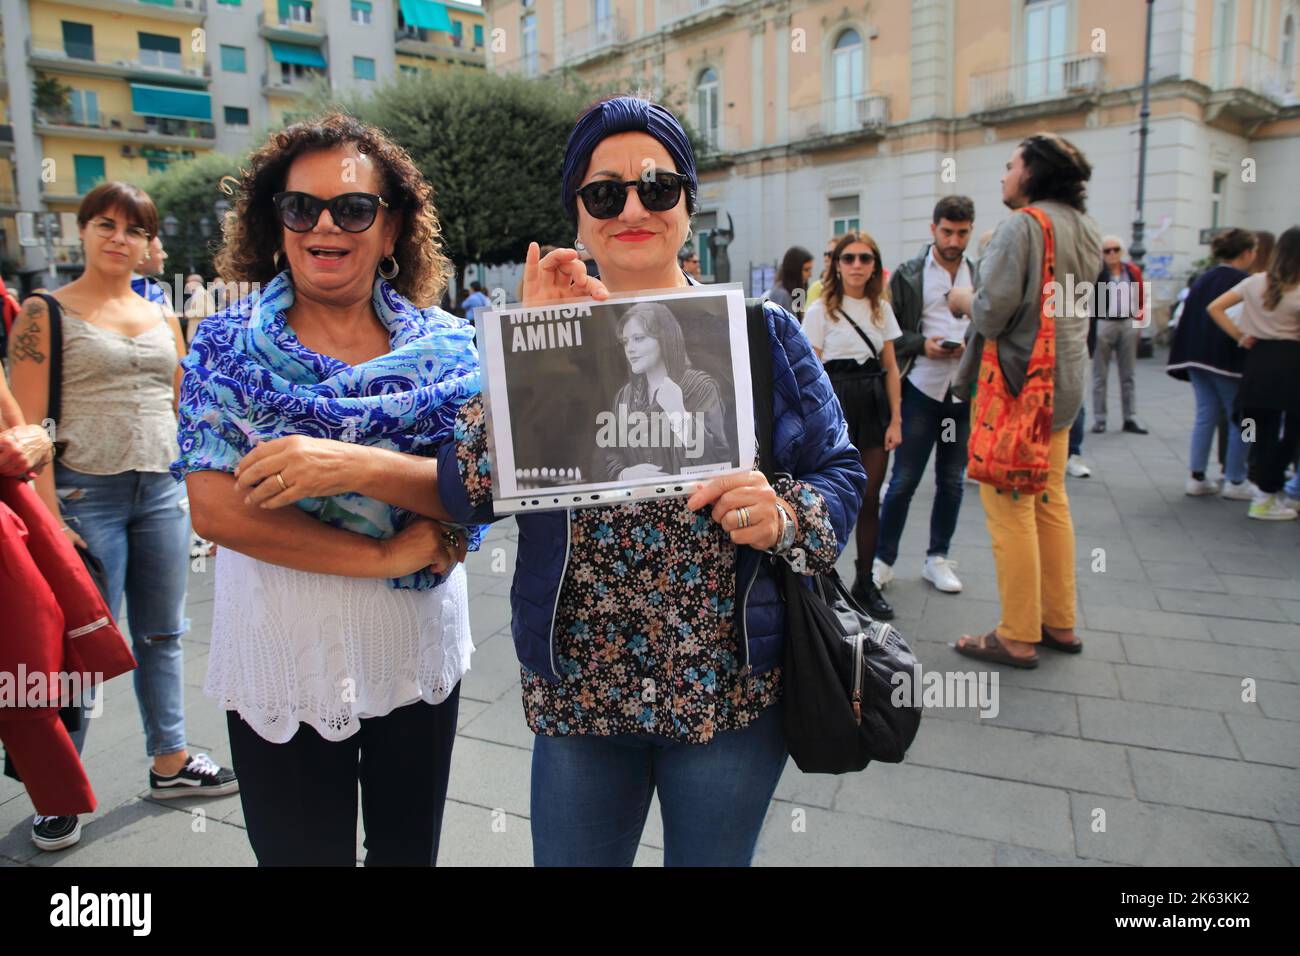 Group of women protesting against the repression of the Iranian regime following the revolt of the Iranian people after the death of Mahsa Amini. Stock Photo